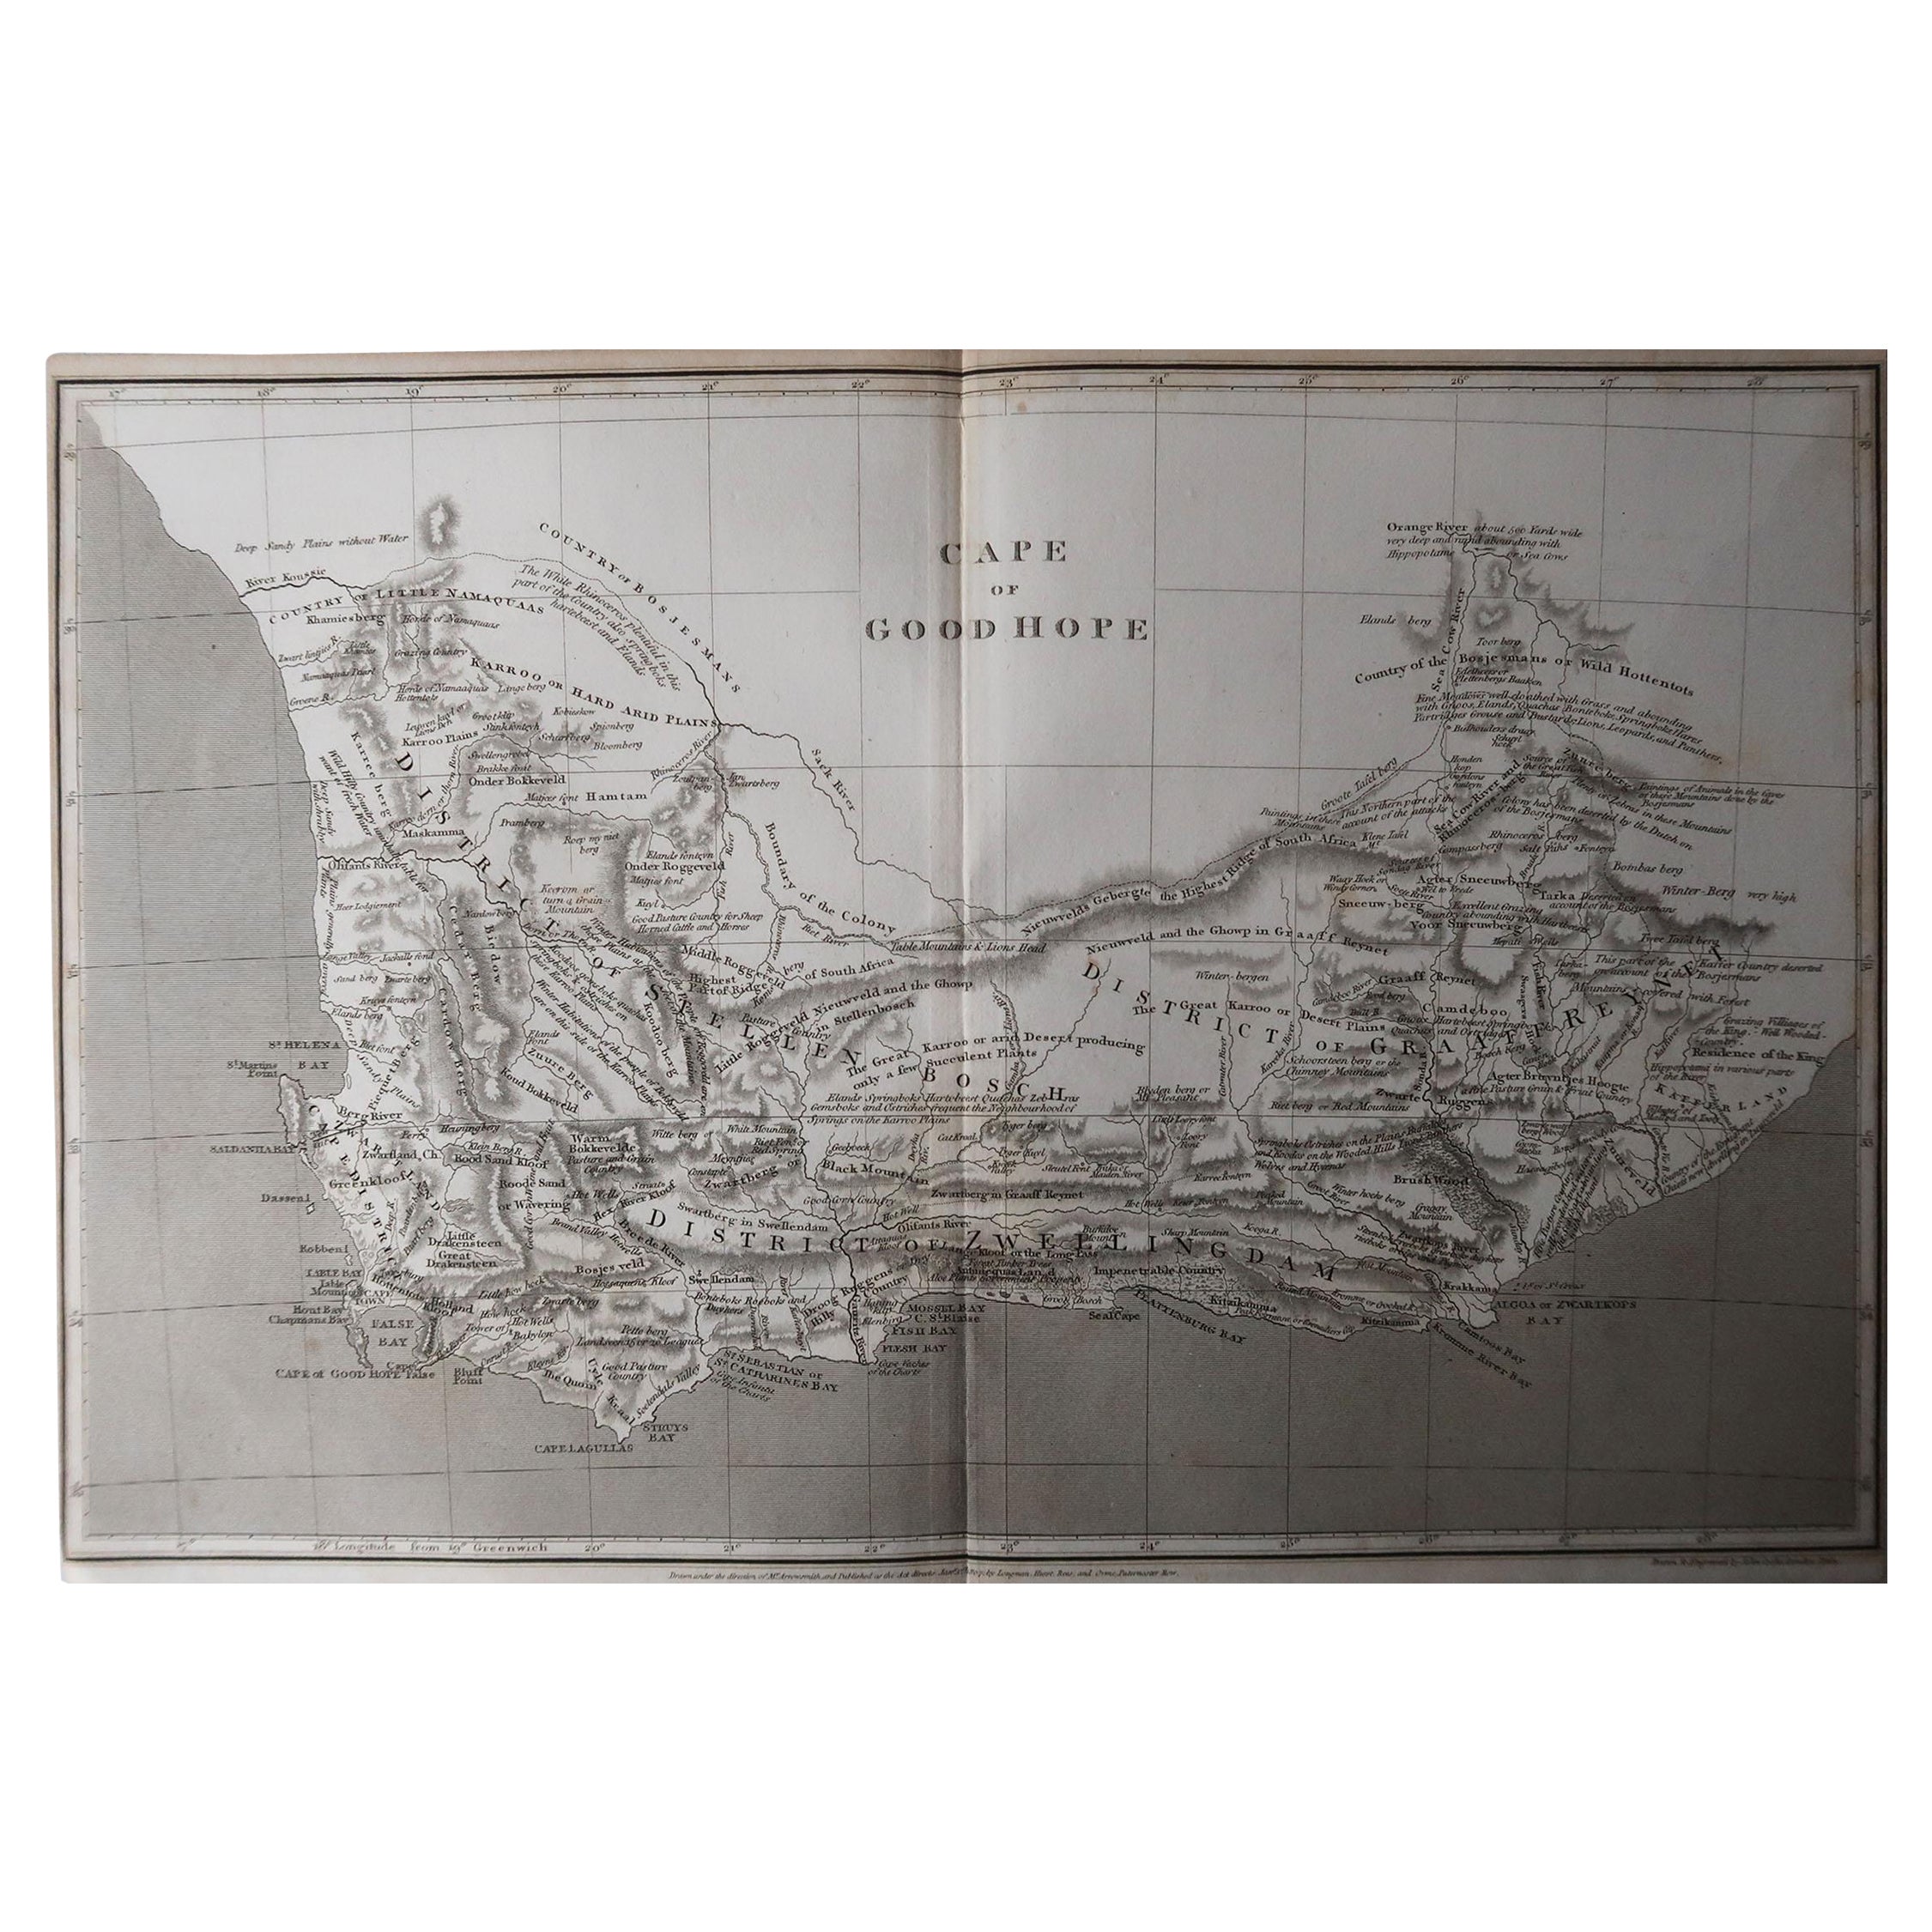 Great map of South Africa.

Drawn under the direction of Arrowsmith.

Copper-plate engraving.

Published by Longman, Hurst, Rees, Orme and Brown, 1820

Unframed.